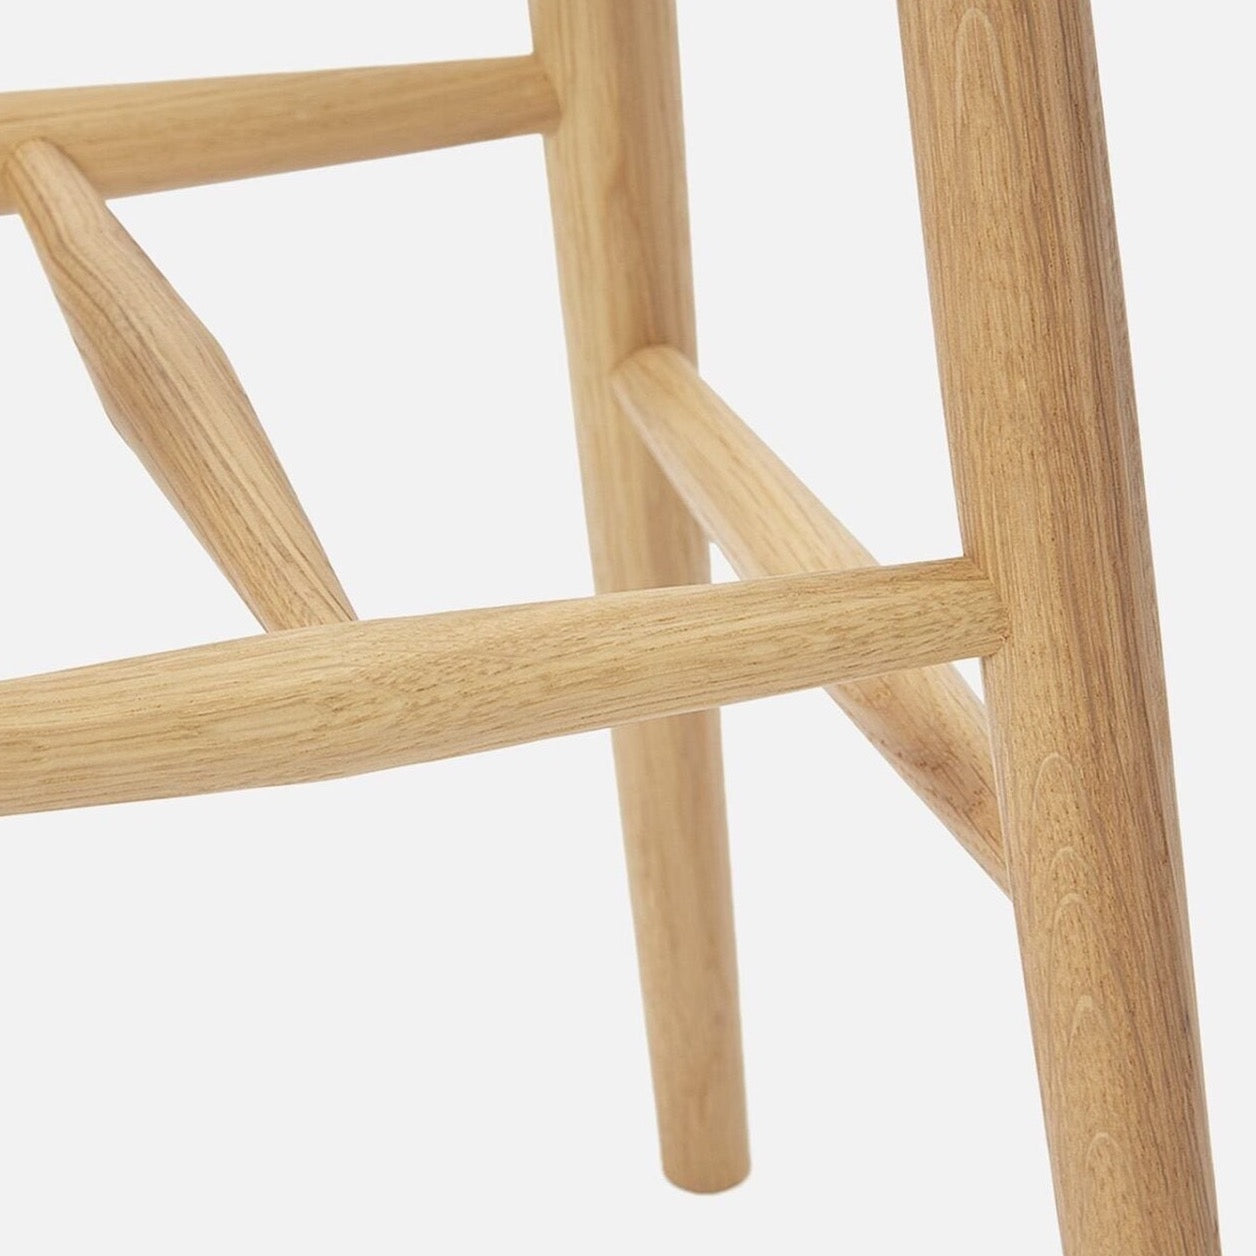 Drifted Low Stool